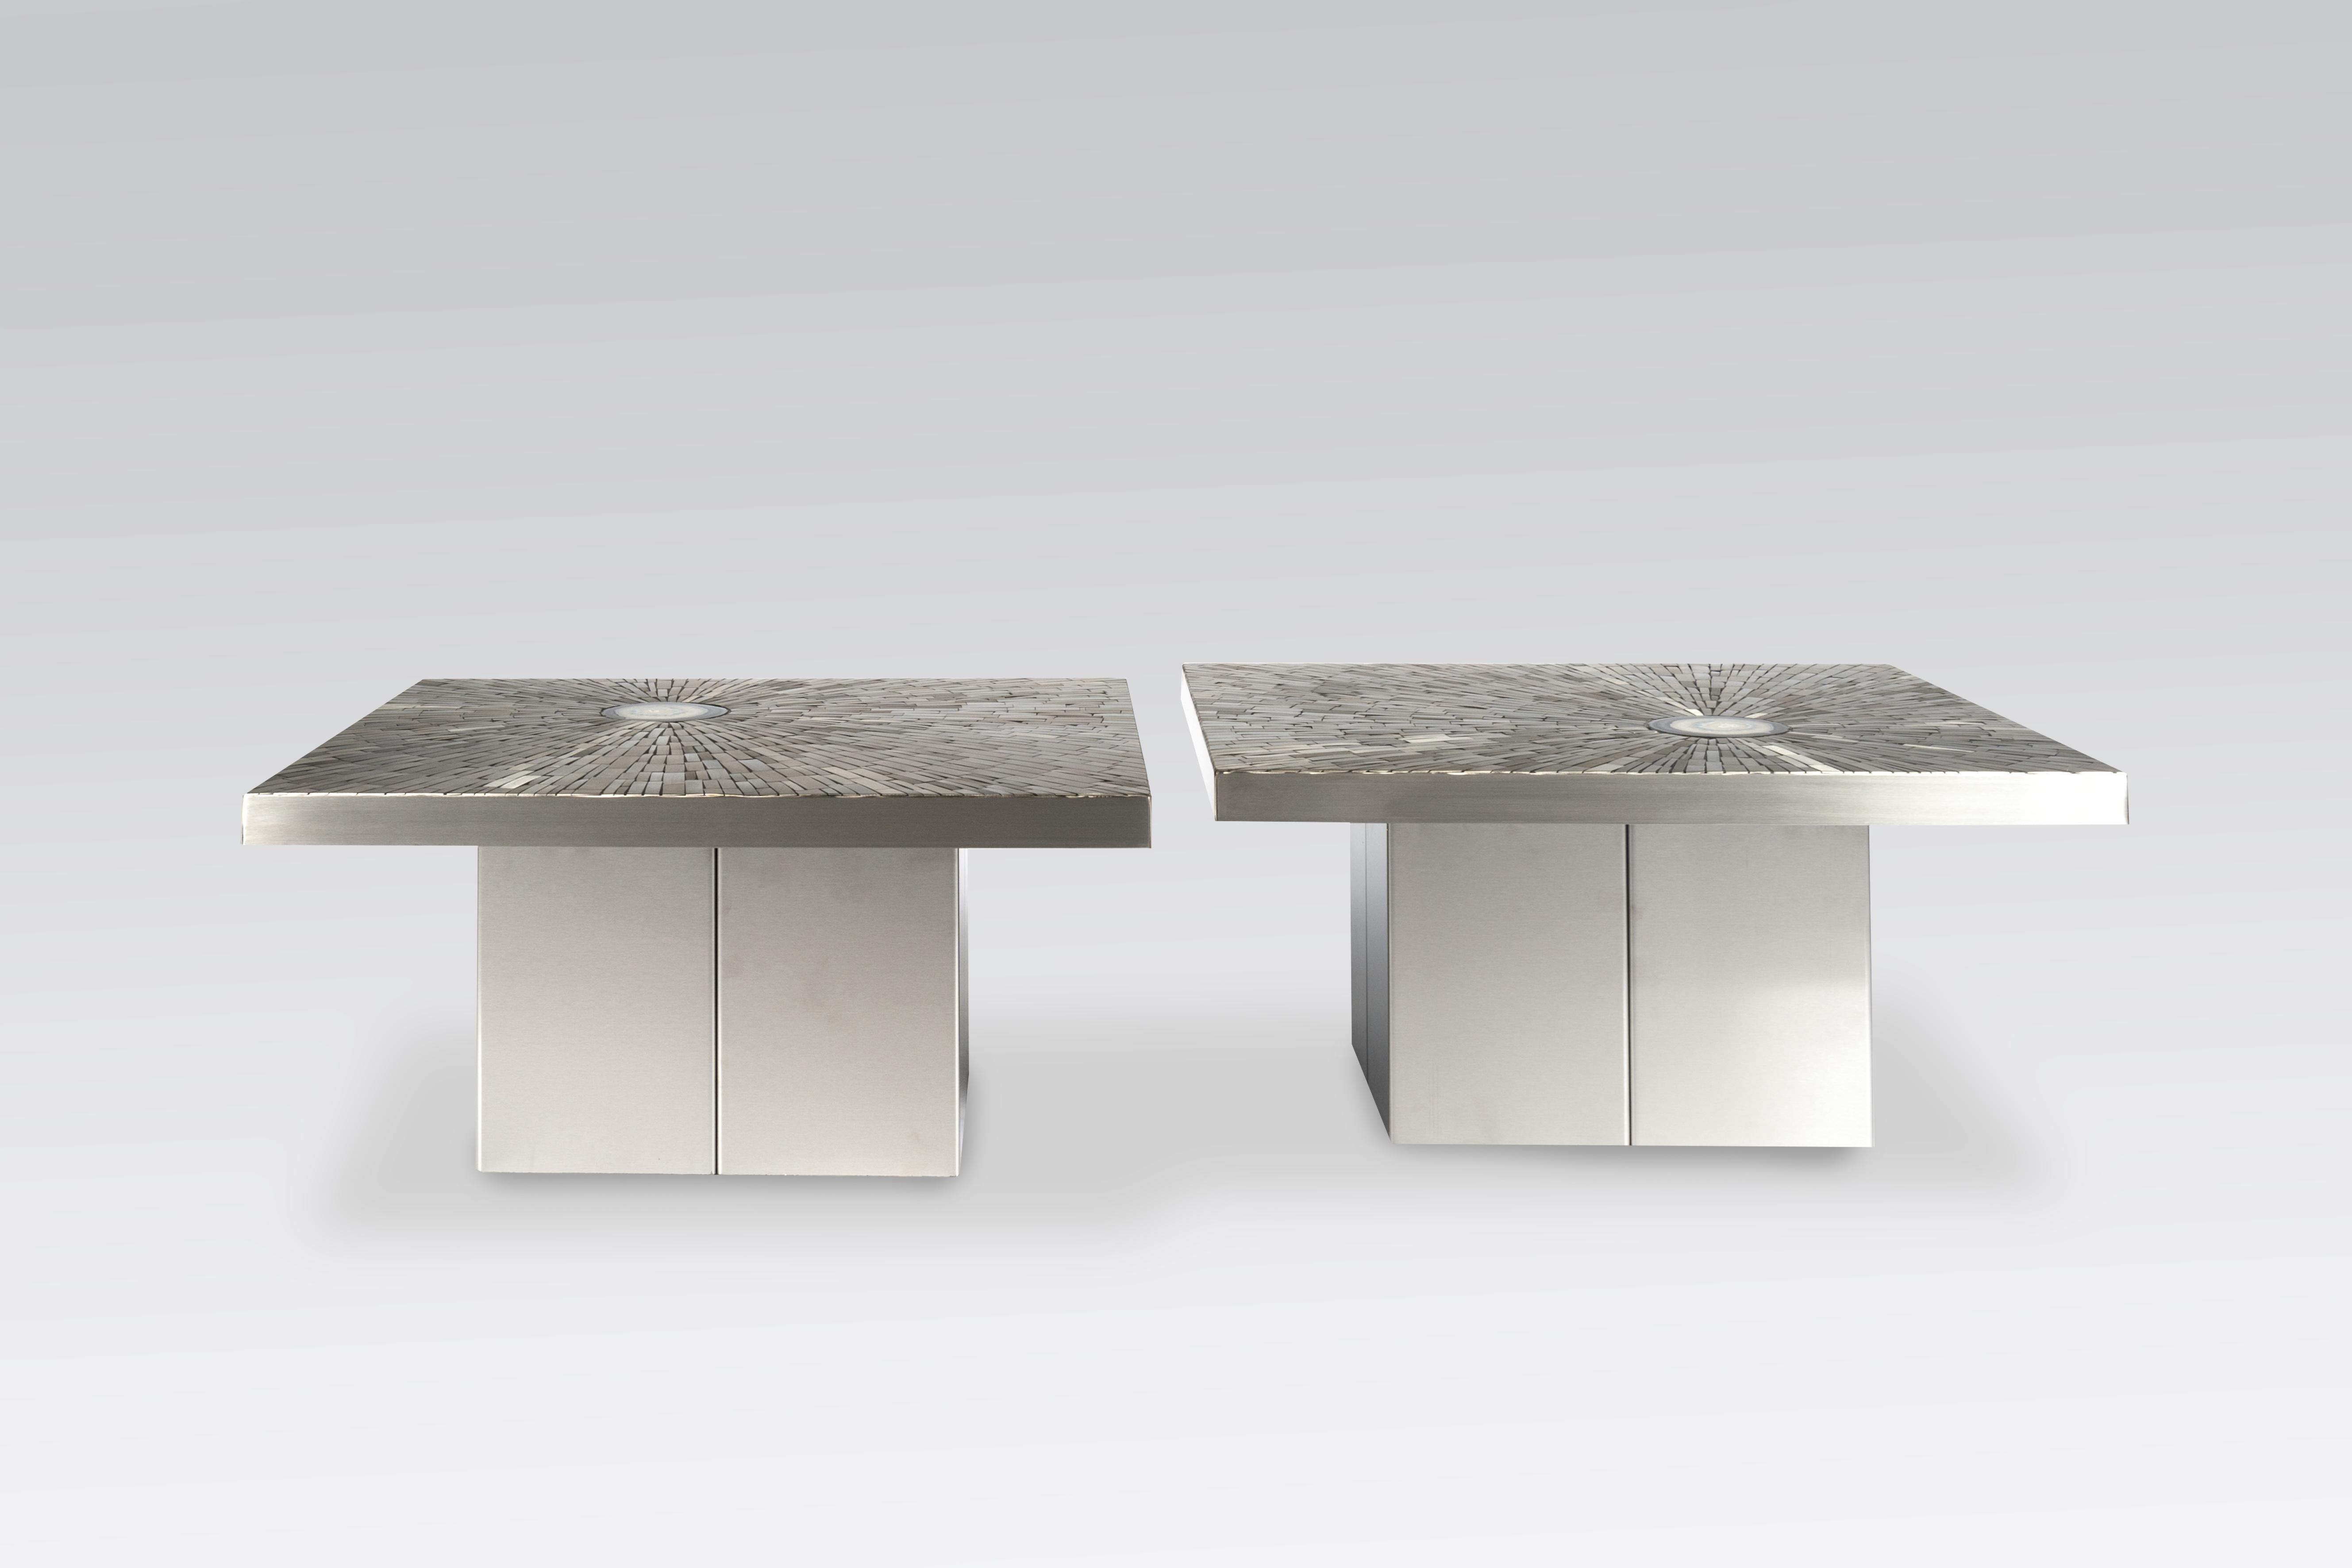 Pair of Side Table in Stainless Steel Mosaic Inlay Agates by Stan Usel 2